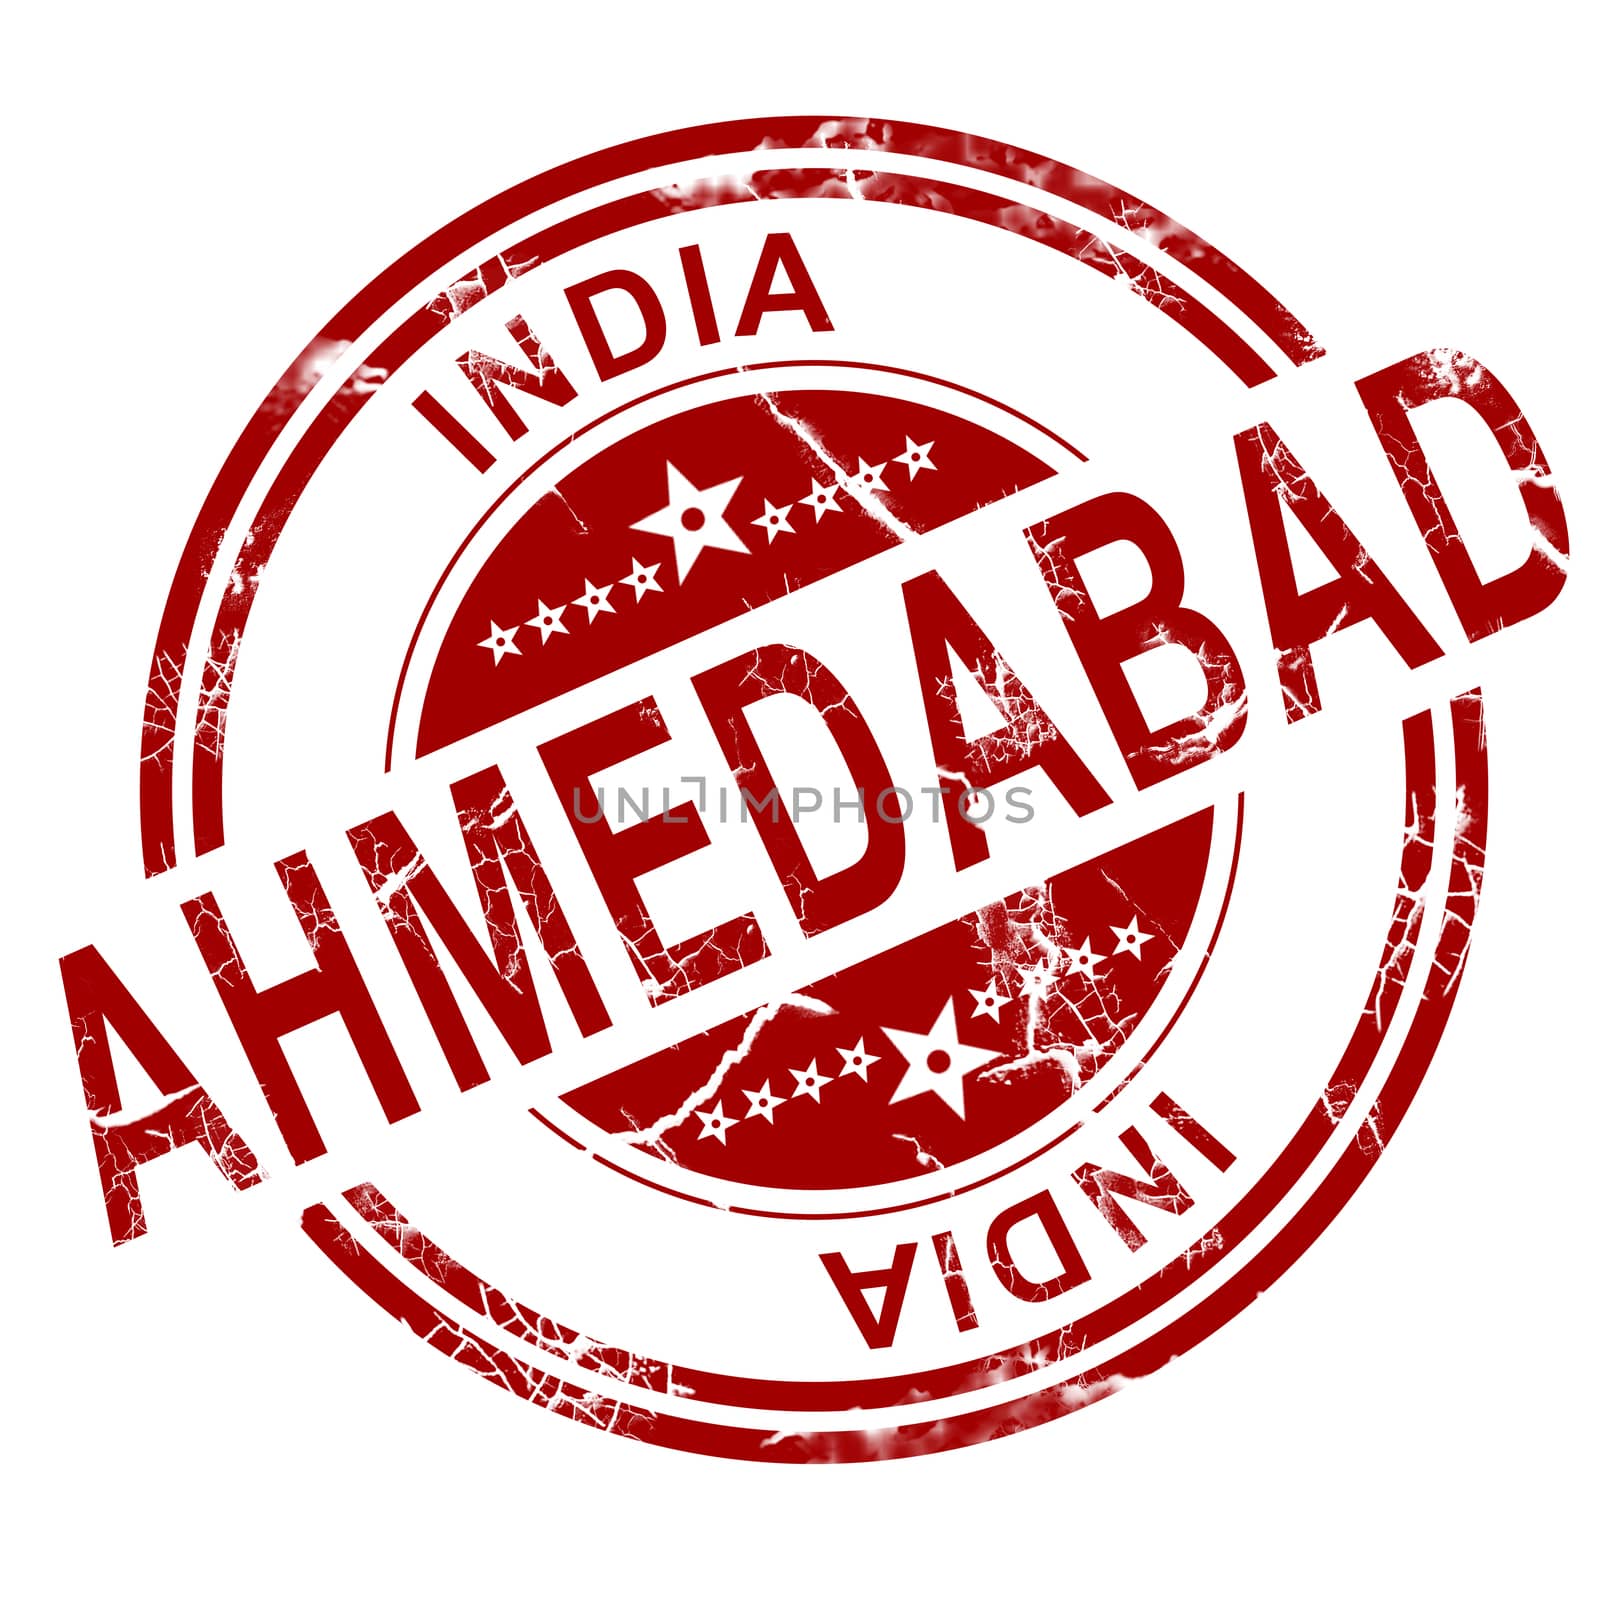 Red Ahmedabad stamp by tang90246